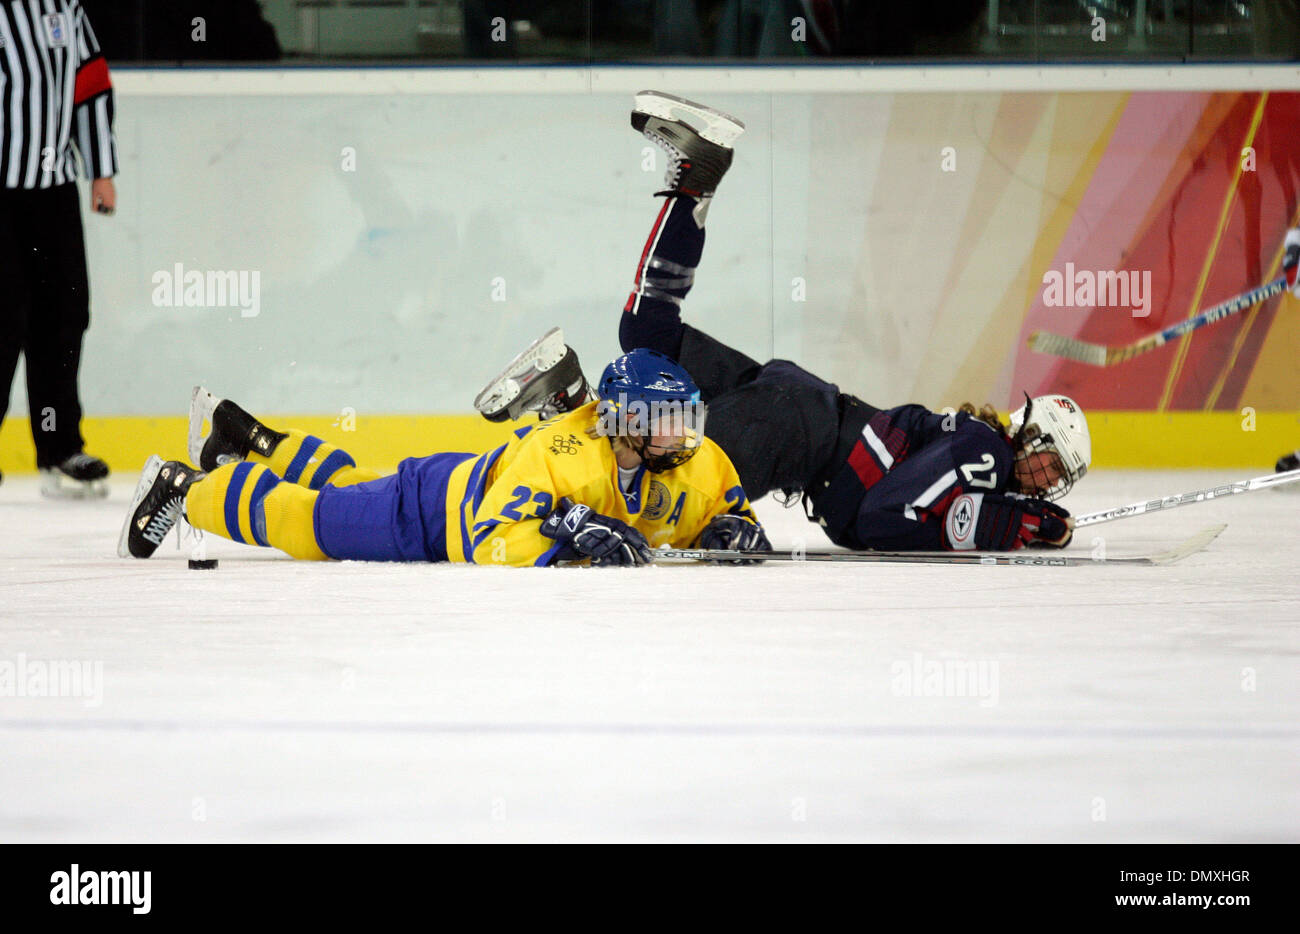 Feb 17, 2006; Turin, ITALY; Sweden beat the United States in a shootout overtime in the women's semifinal game in Turin at the XX Winter Olympic Games  on Tuesday, Feb. 17, 2006.  Here, SARAH PARSONS of the United States gets tripped up by Sweden's GUNILLA ANDERSON. Mandatory Credit: Photo by K.C. Alfred/SDU-T /ZUMA Press. (©) Copyright 2006 by SDU-T Stock Photo